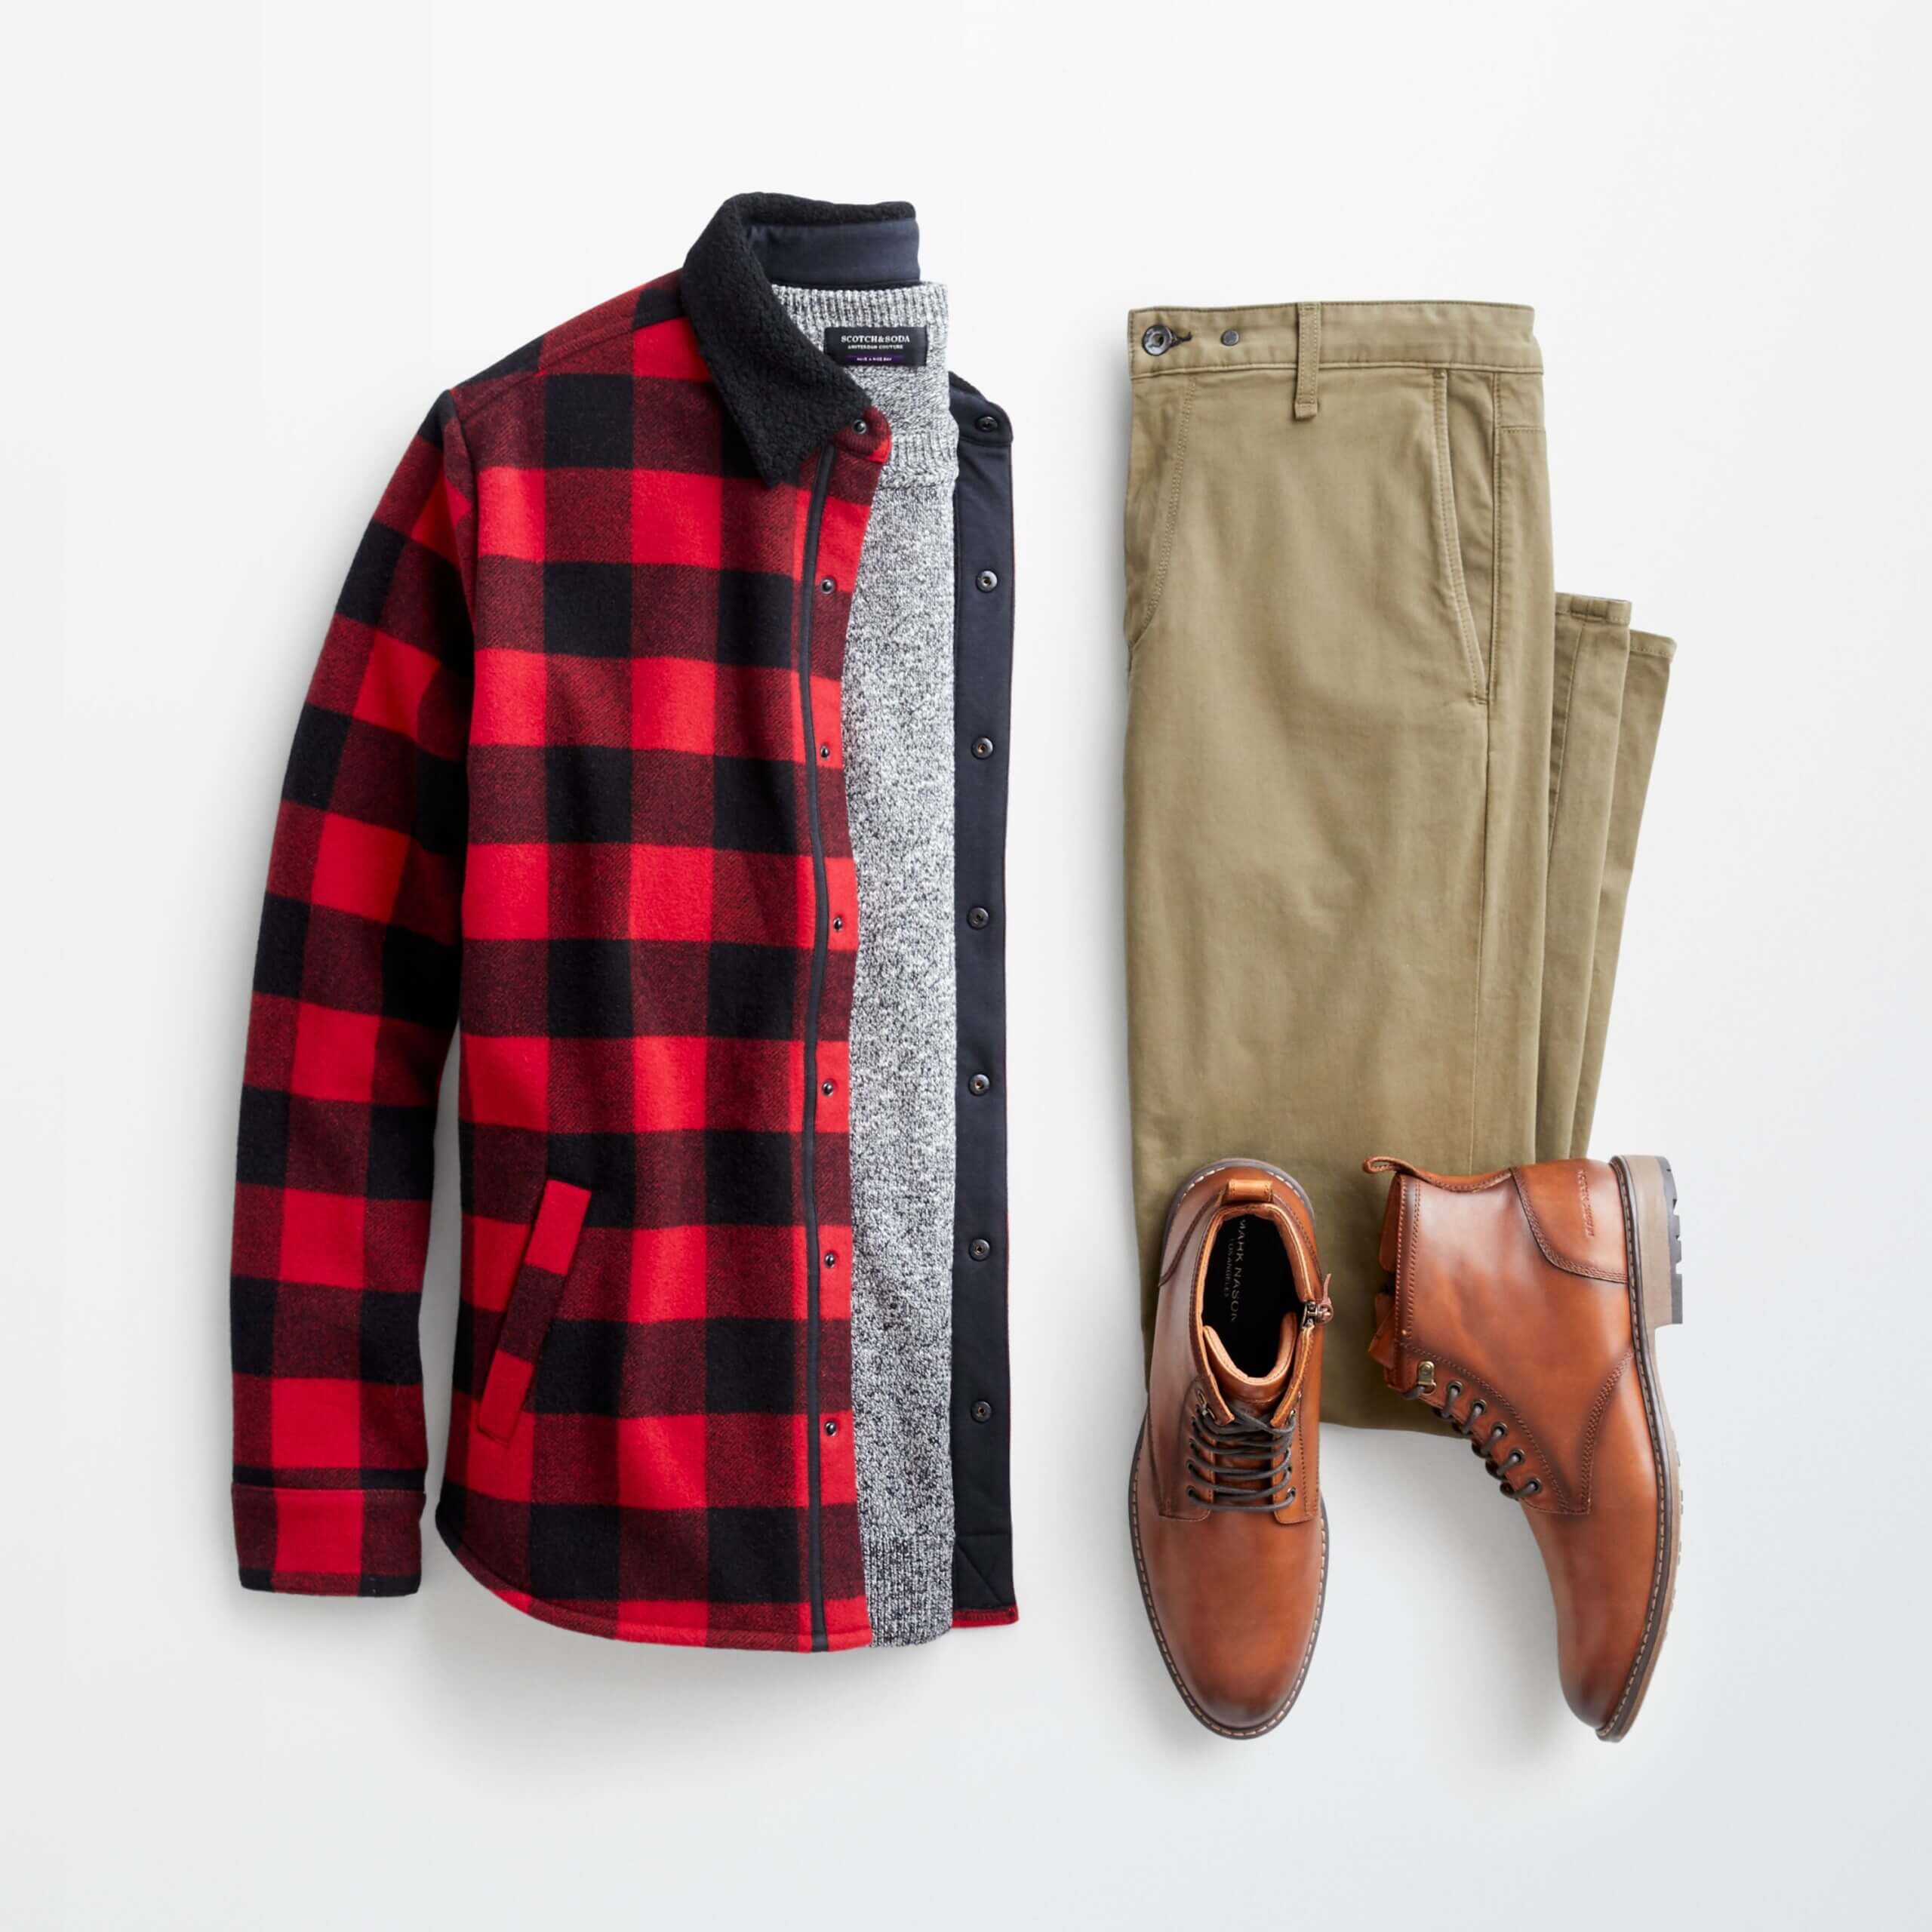 Winter Clothing Essentials - Classy Casual Winter Outfits For Guys